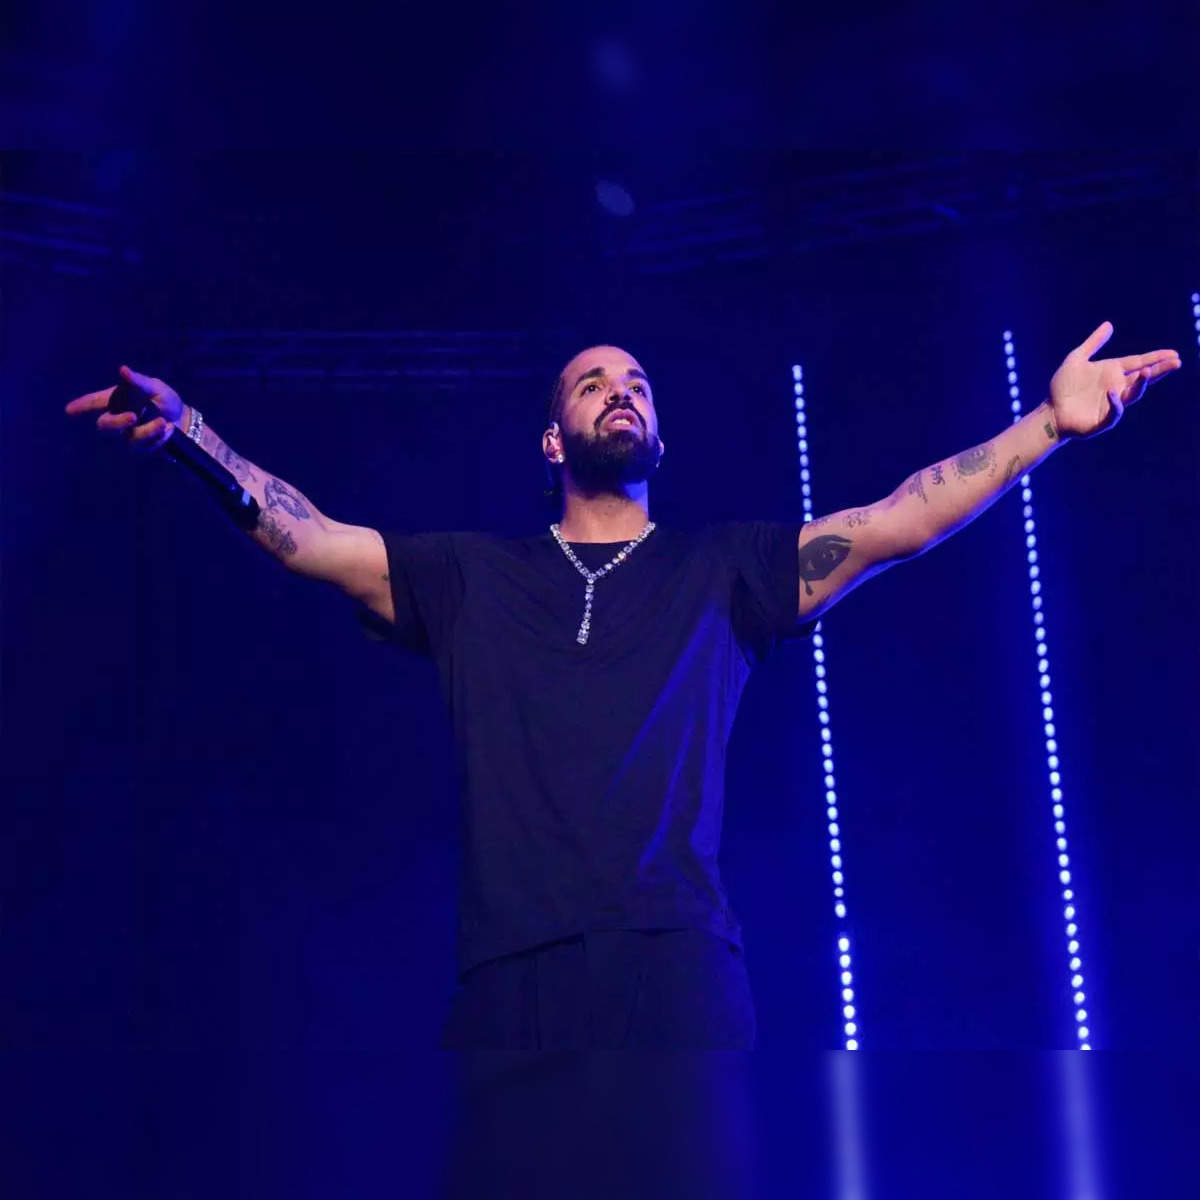 Drake Related (@drakerelated) • Instagram photos and videos